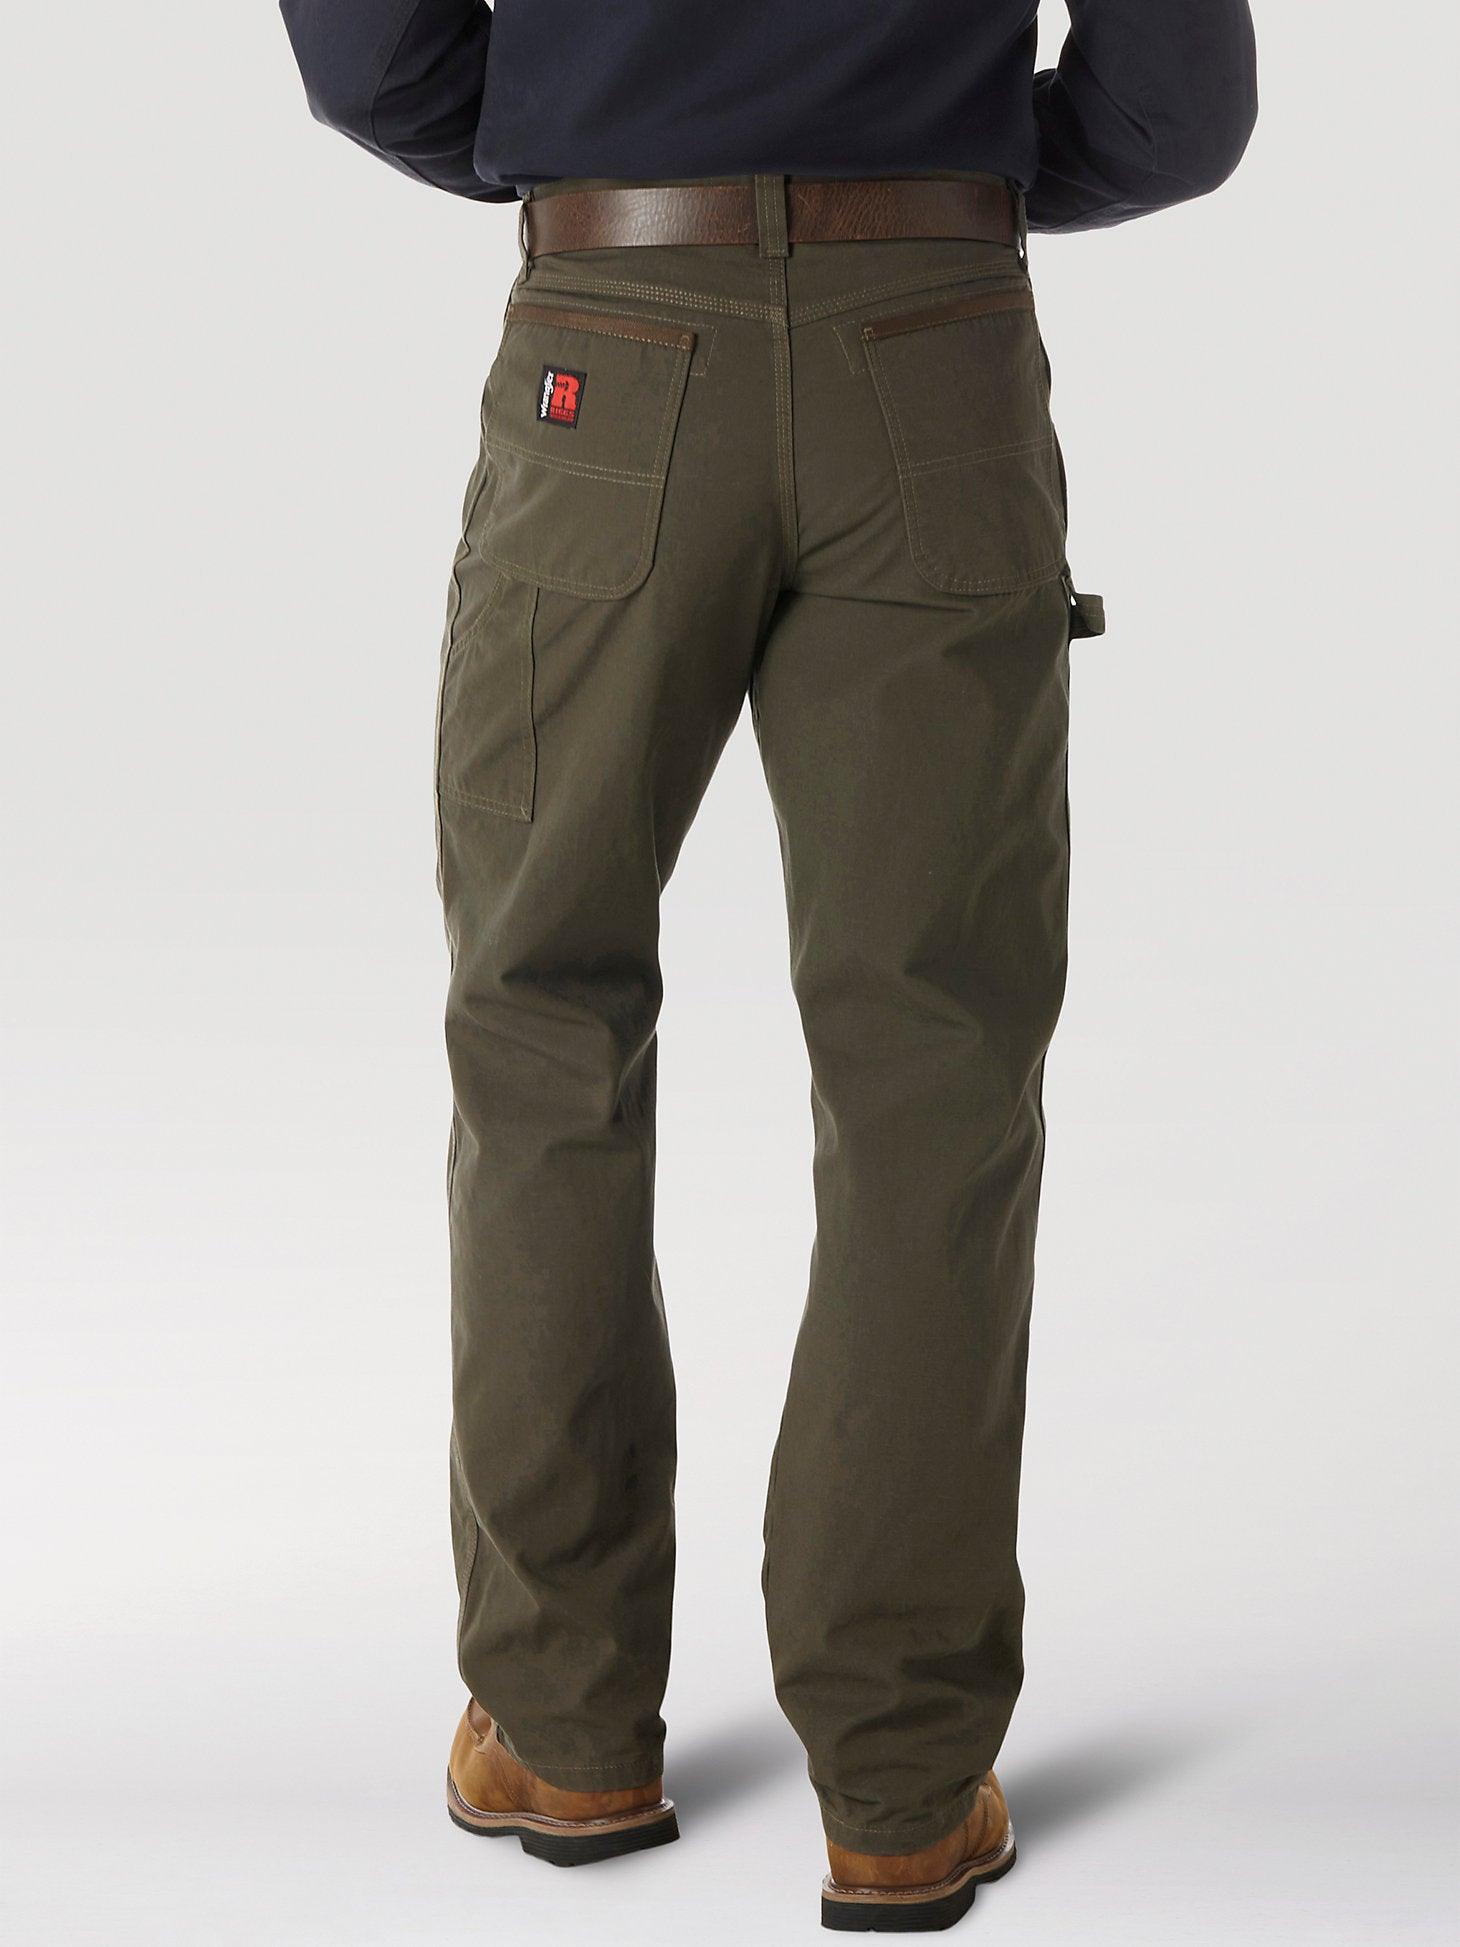 Ripstop Ranger Cargo Pant, Loden - Purpose-Built / Home of the Trades